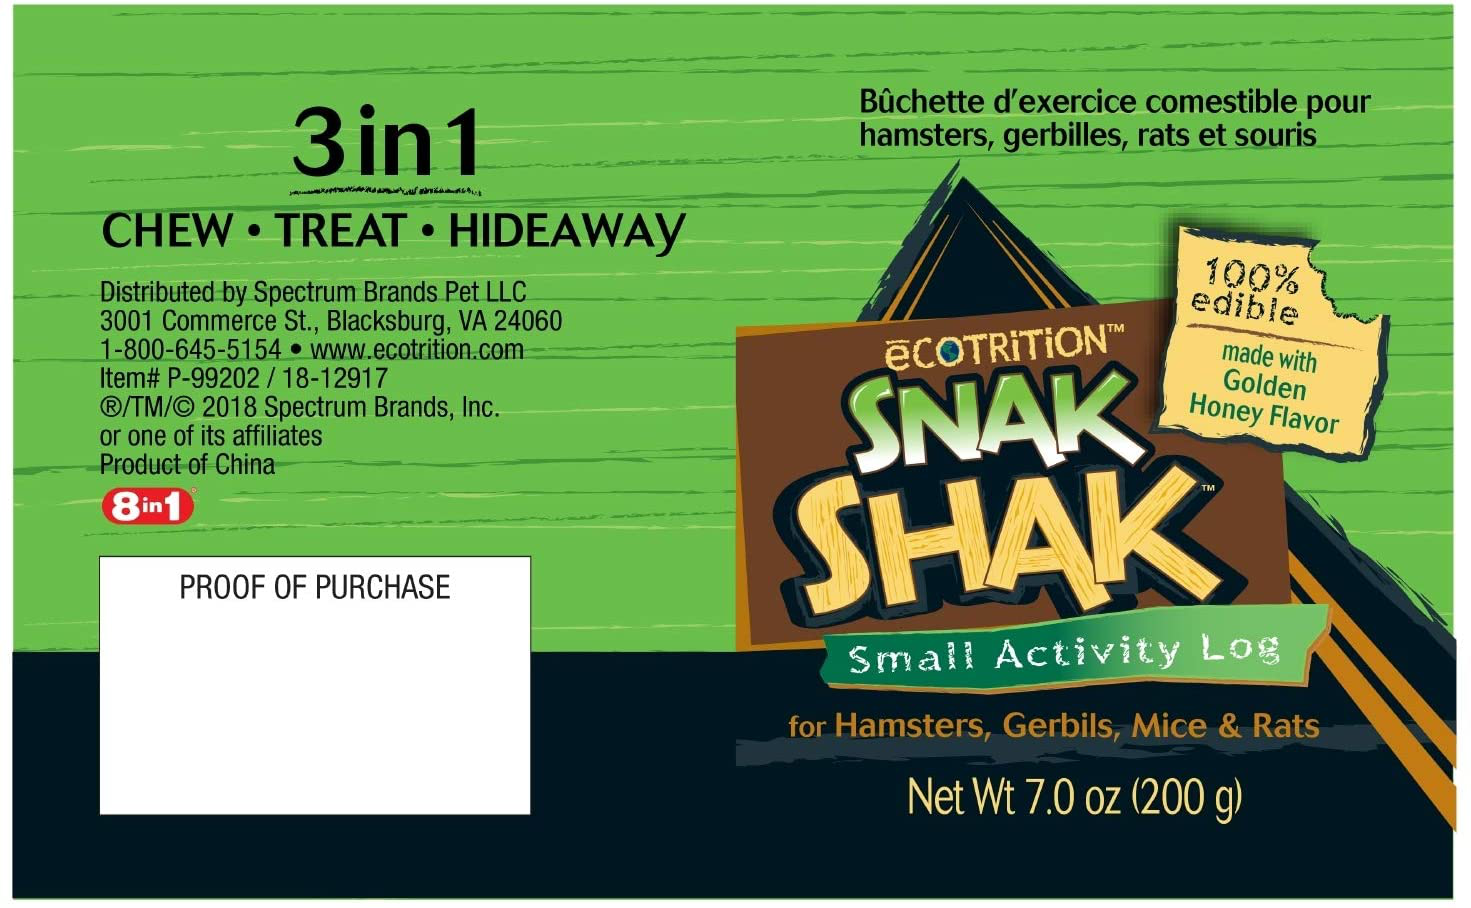 Ecotrition Snak Shak Edible Hideaway for Hamsters, Gerbils, Mice and Small Animals, 3-In-1 Chew Treat and Hideaway Animals & Pet Supplies > Pet Supplies > Small Animal Supplies > Small Animal Habitat Accessories eCOTRITION   